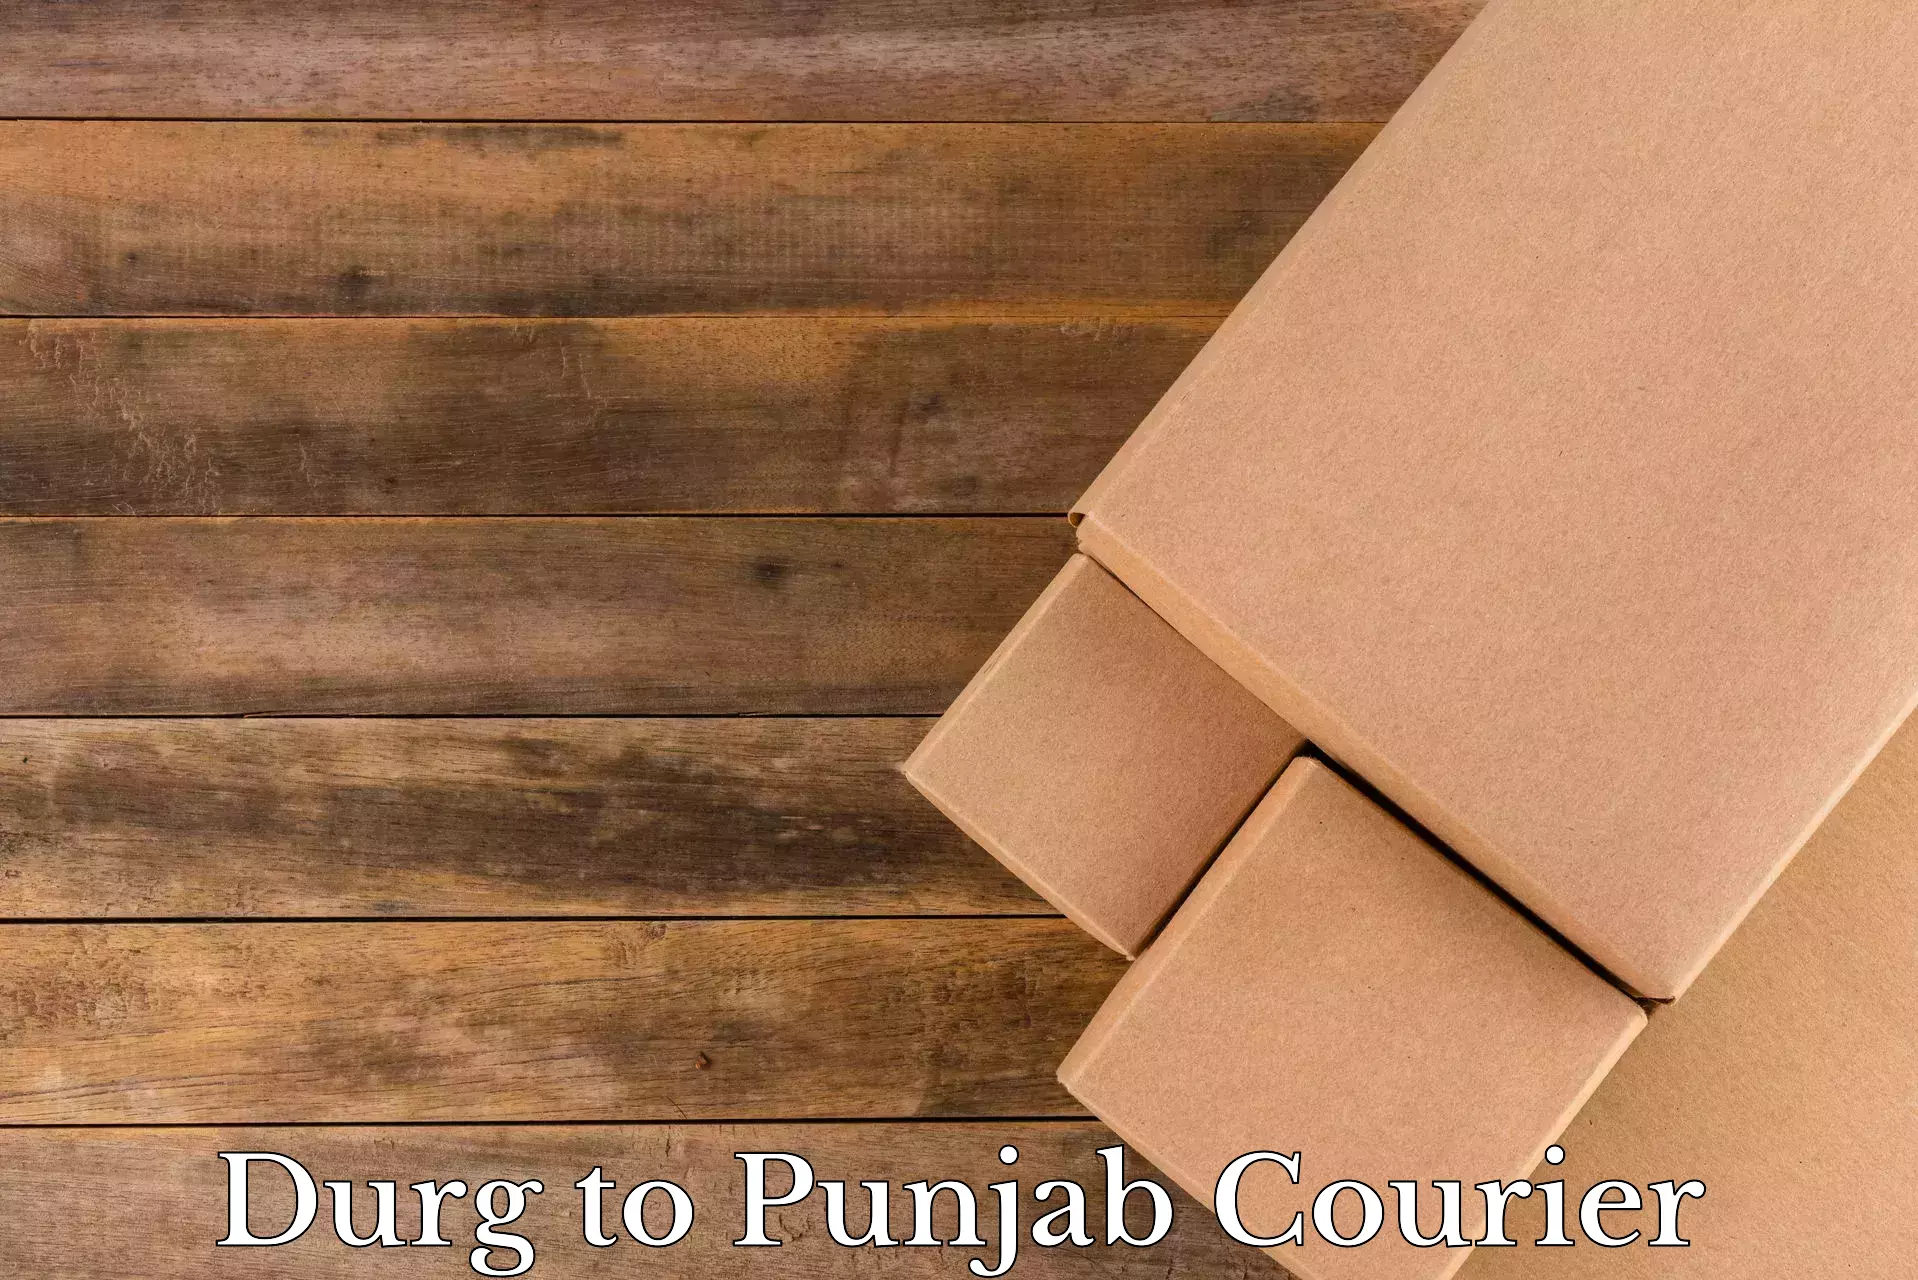 Furniture transport specialists Durg to Ludhiana